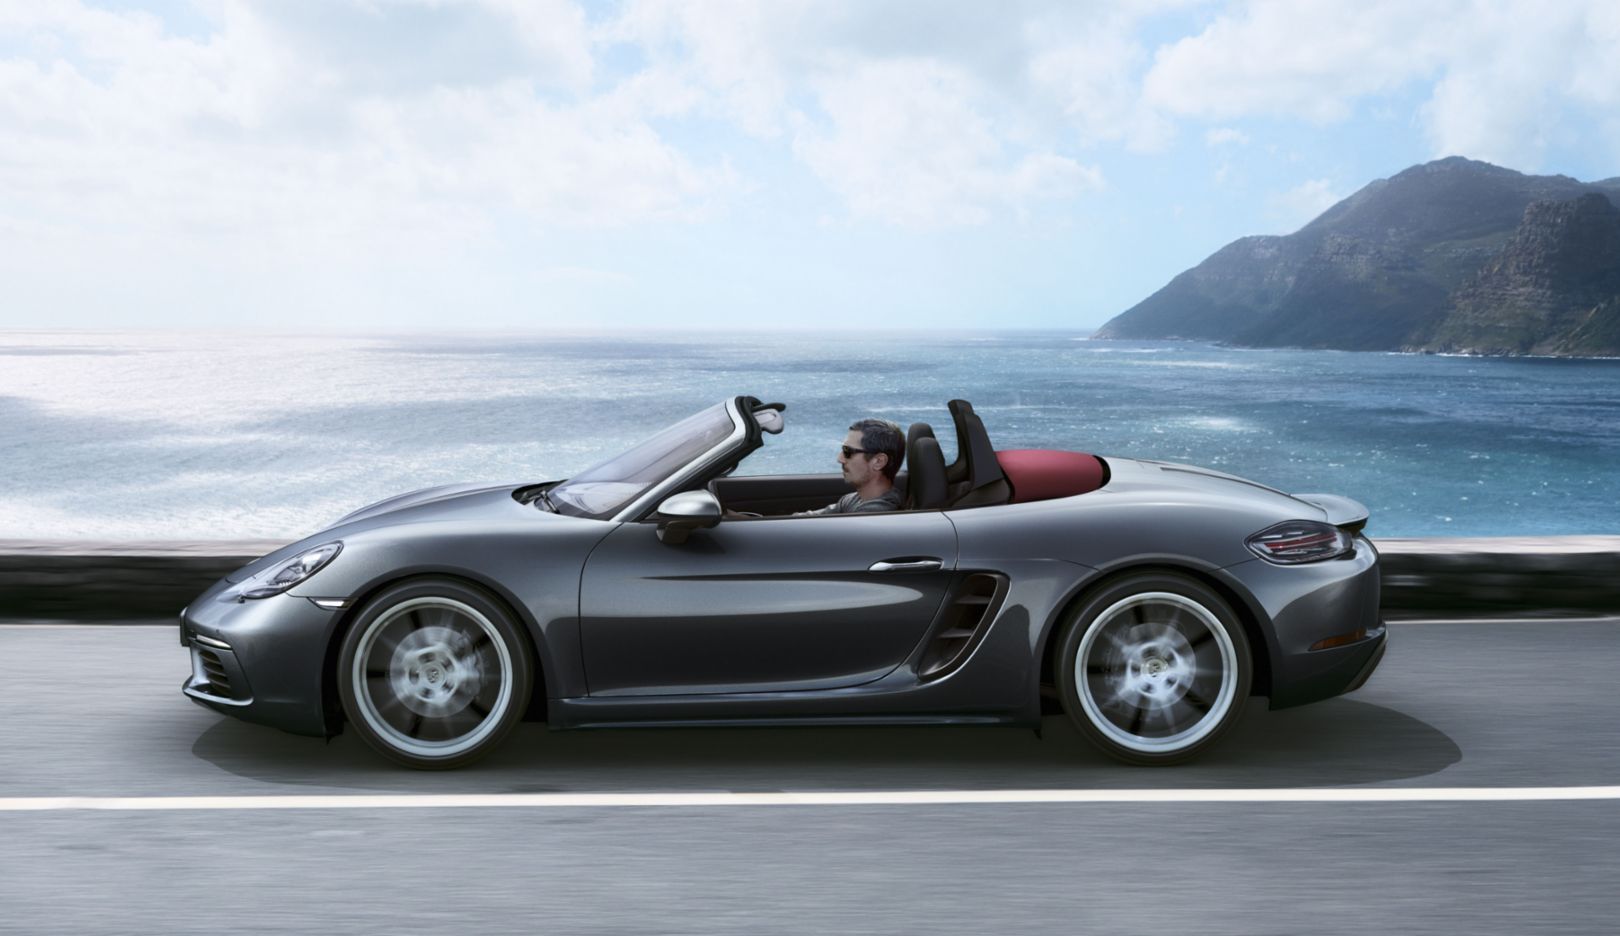 982 generation: model years 2016–today. Twenty years after the first Boxster’s début, Porsche is relaunching the roadster: the new model generation is called the 718 and is a nod to the 718 mid-engine sports cars from the 1950s and 1960s. The centrepiece is the newly developed four-cylinder boxer engine with turbocharging.